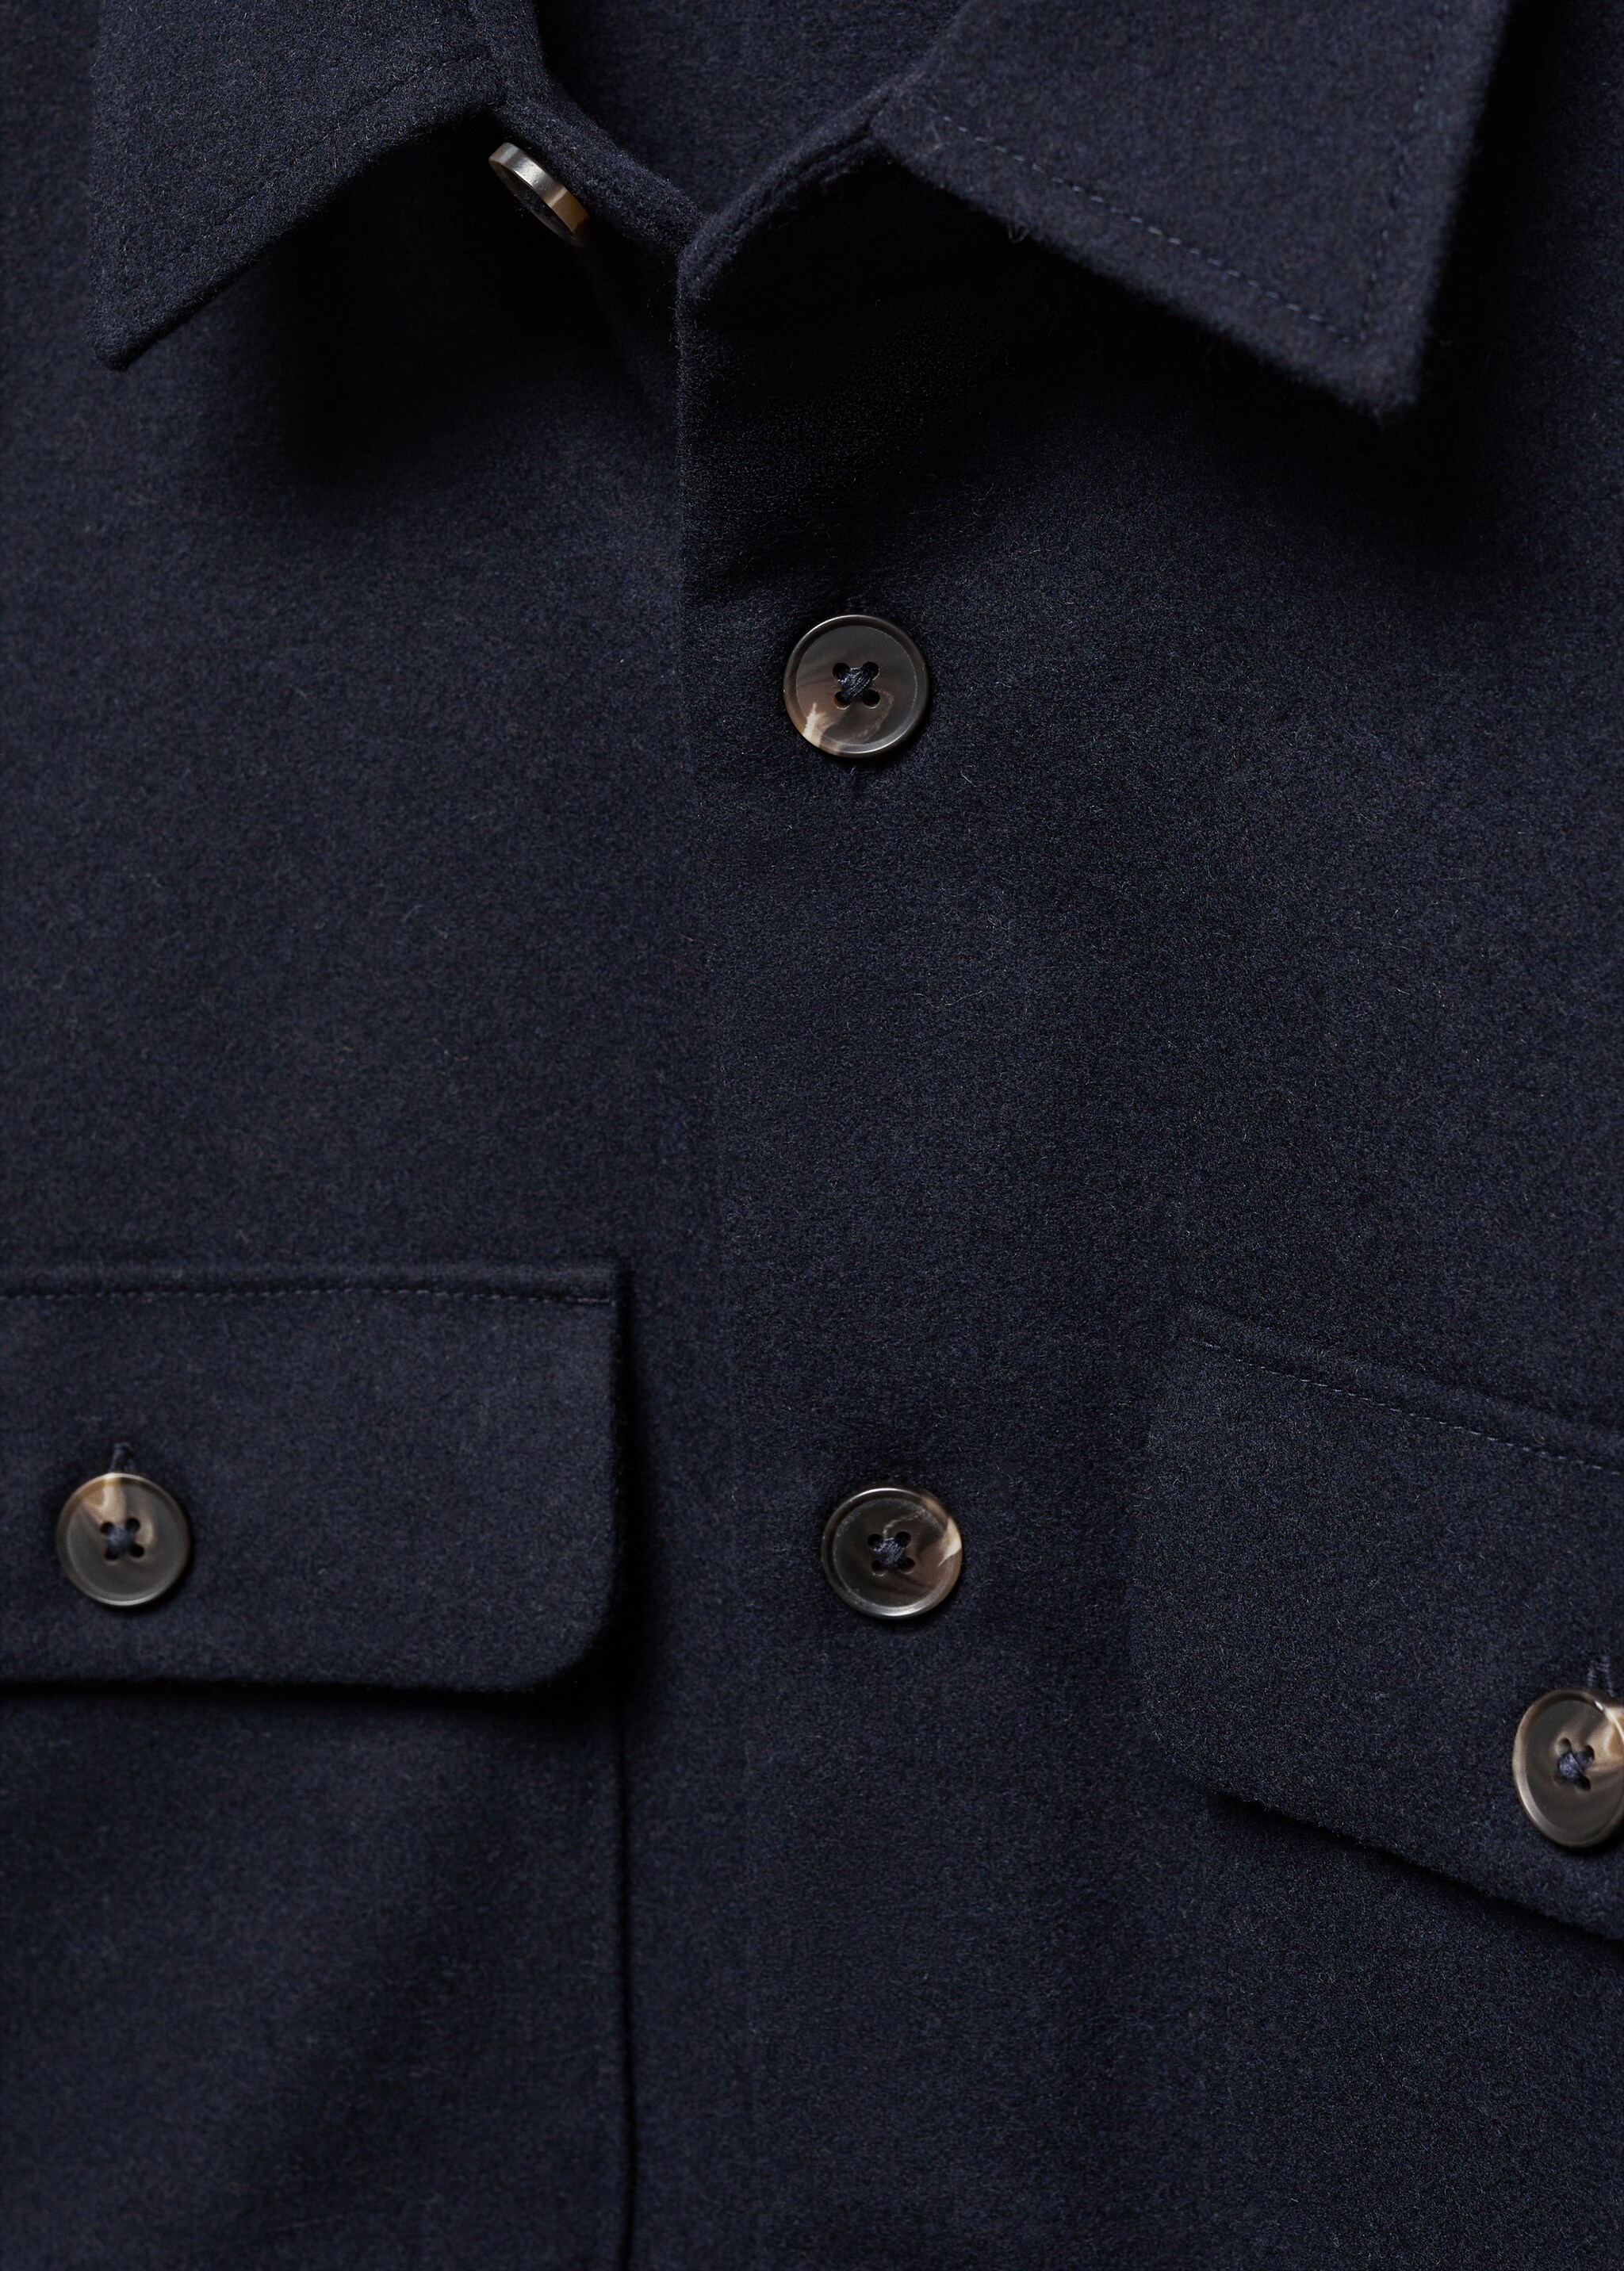 Wool overshirt with pockets - Details of the article 8